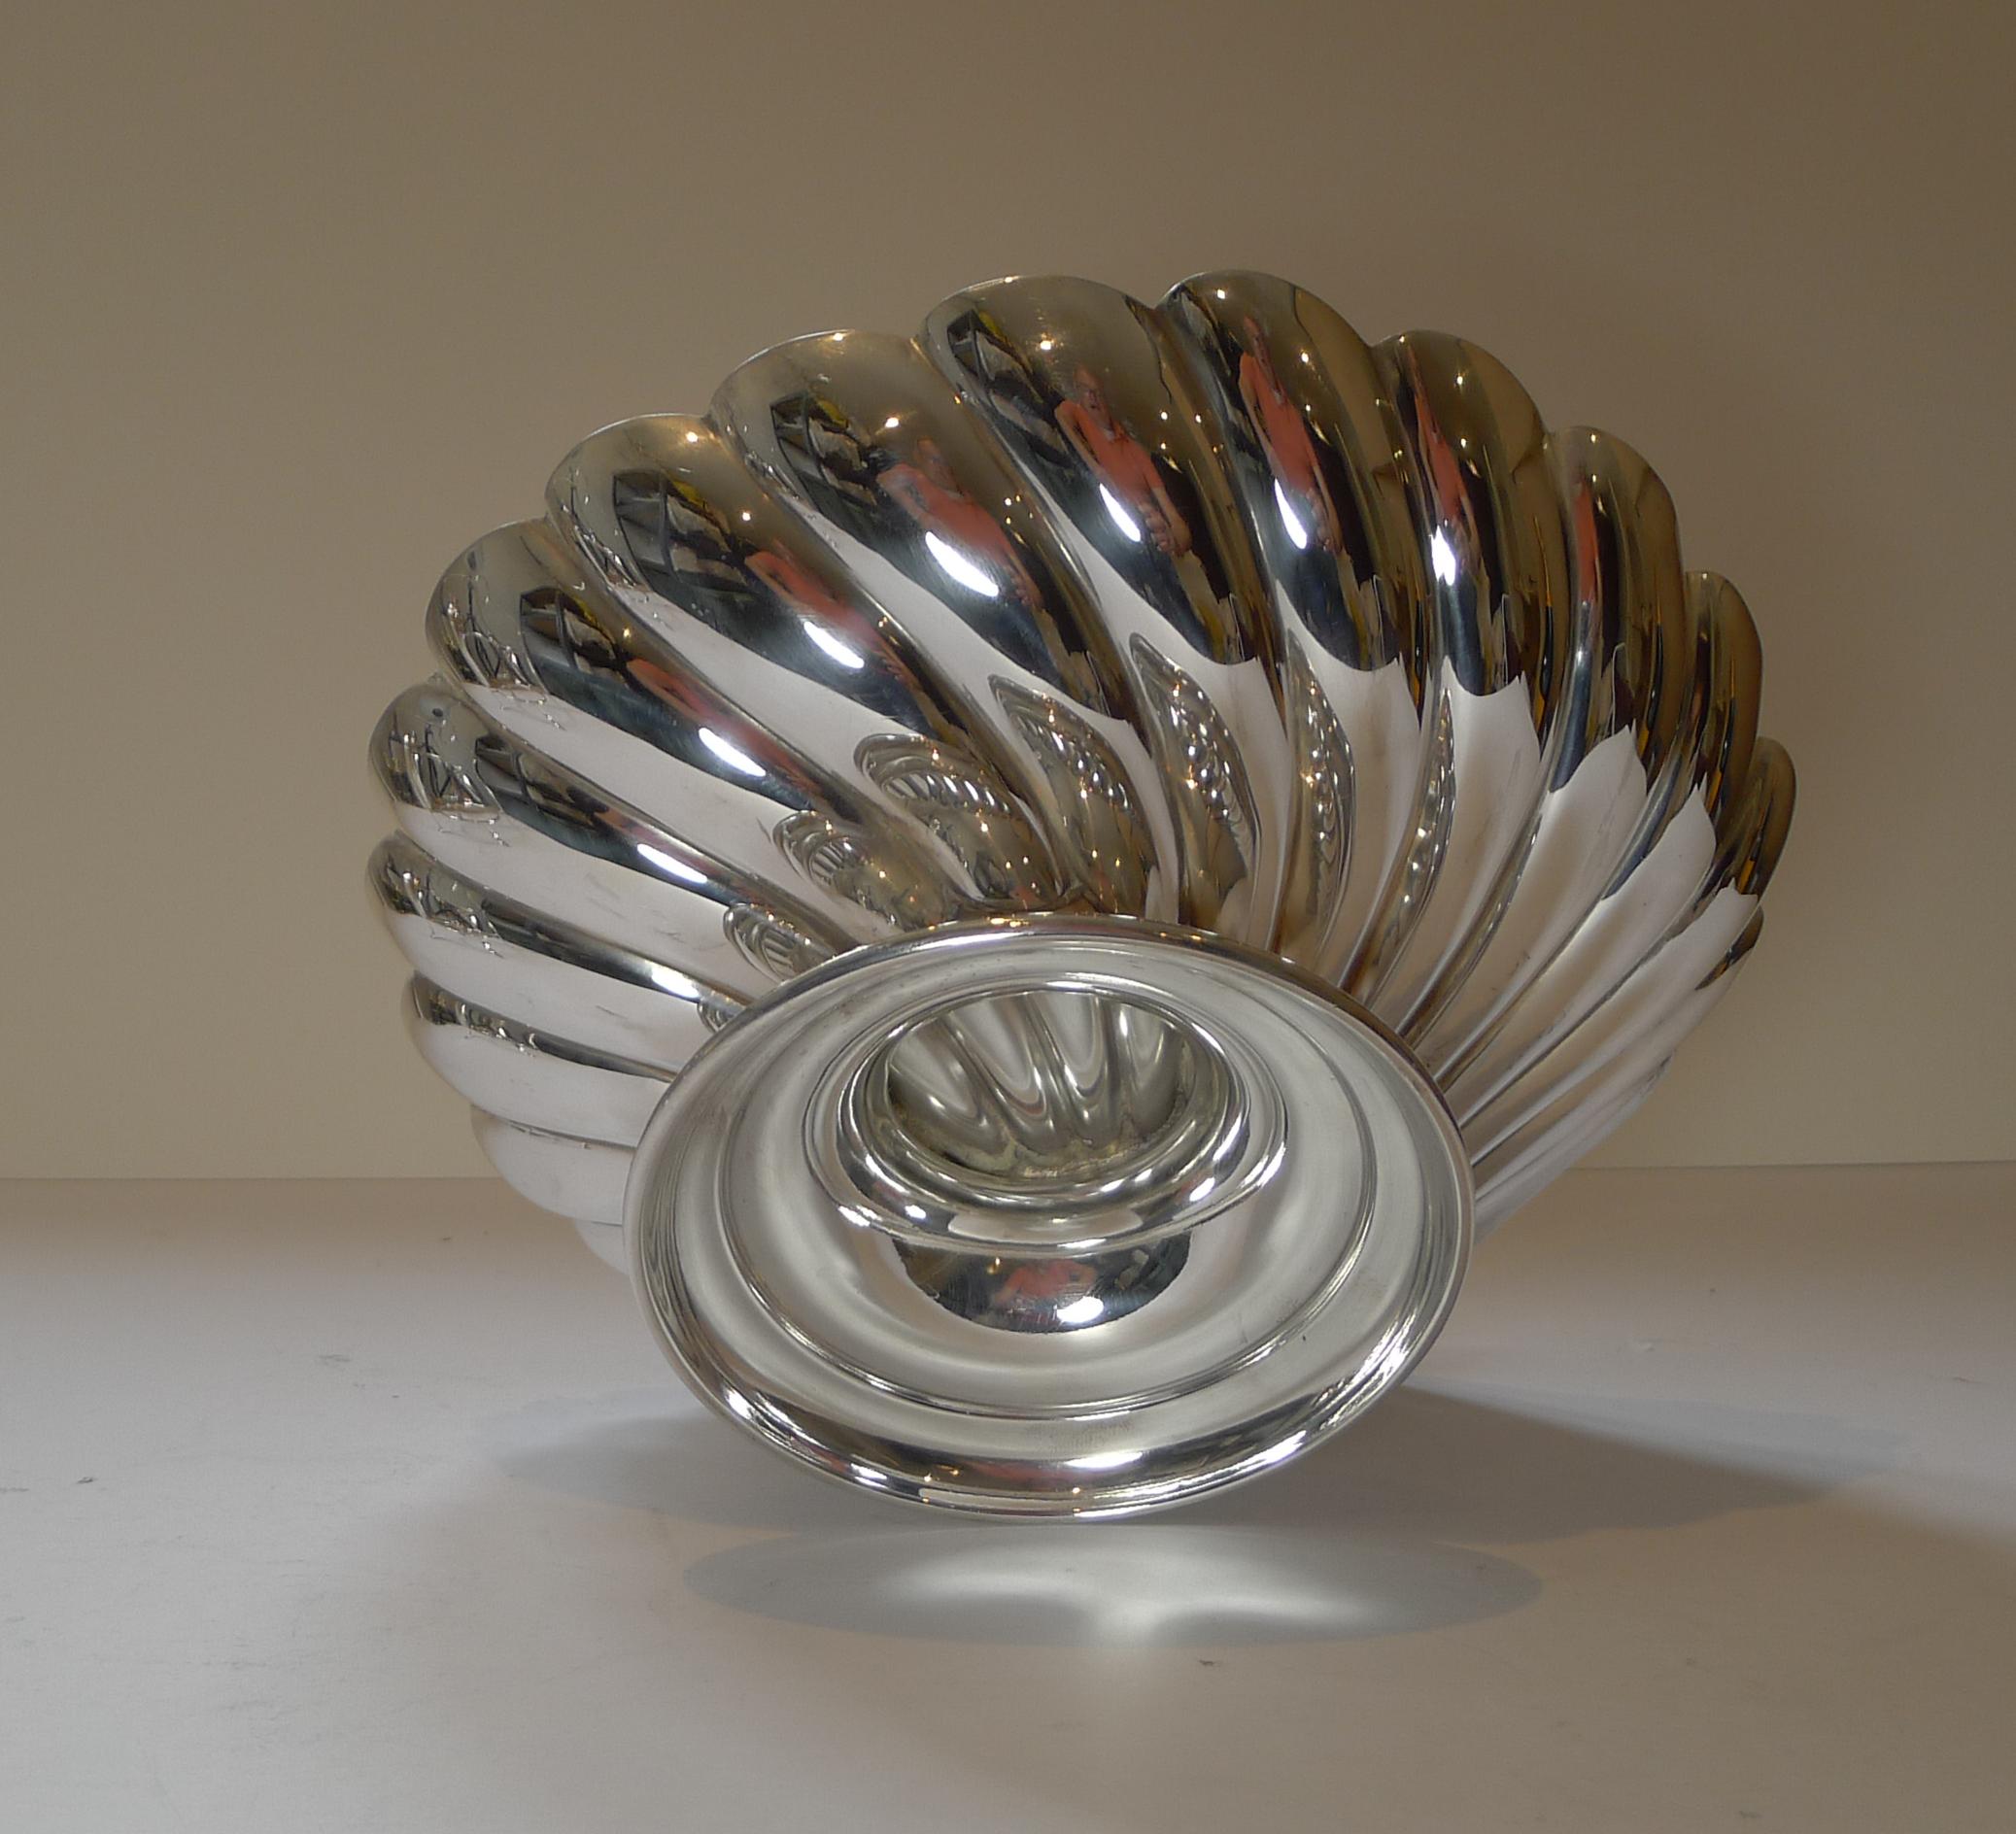 Late 19th Century Antique English Silver Plated Squirrel Nut Dish by William Hutton, circa 1890